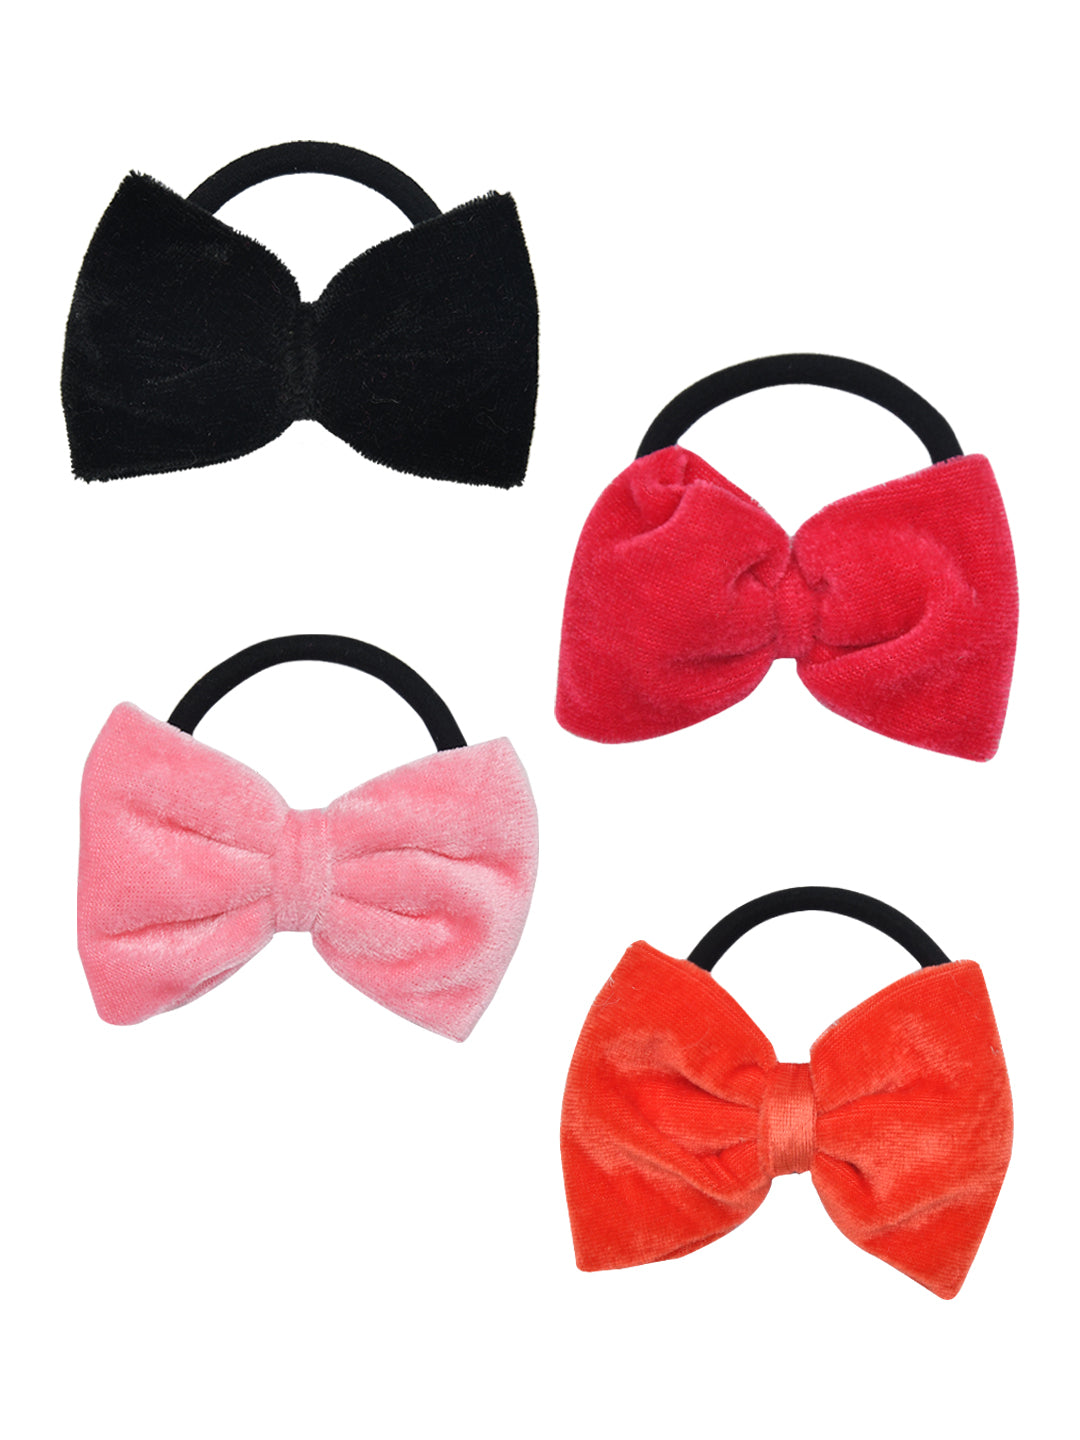 Set of 4 Multicolor Bow Hair Ties for Girls